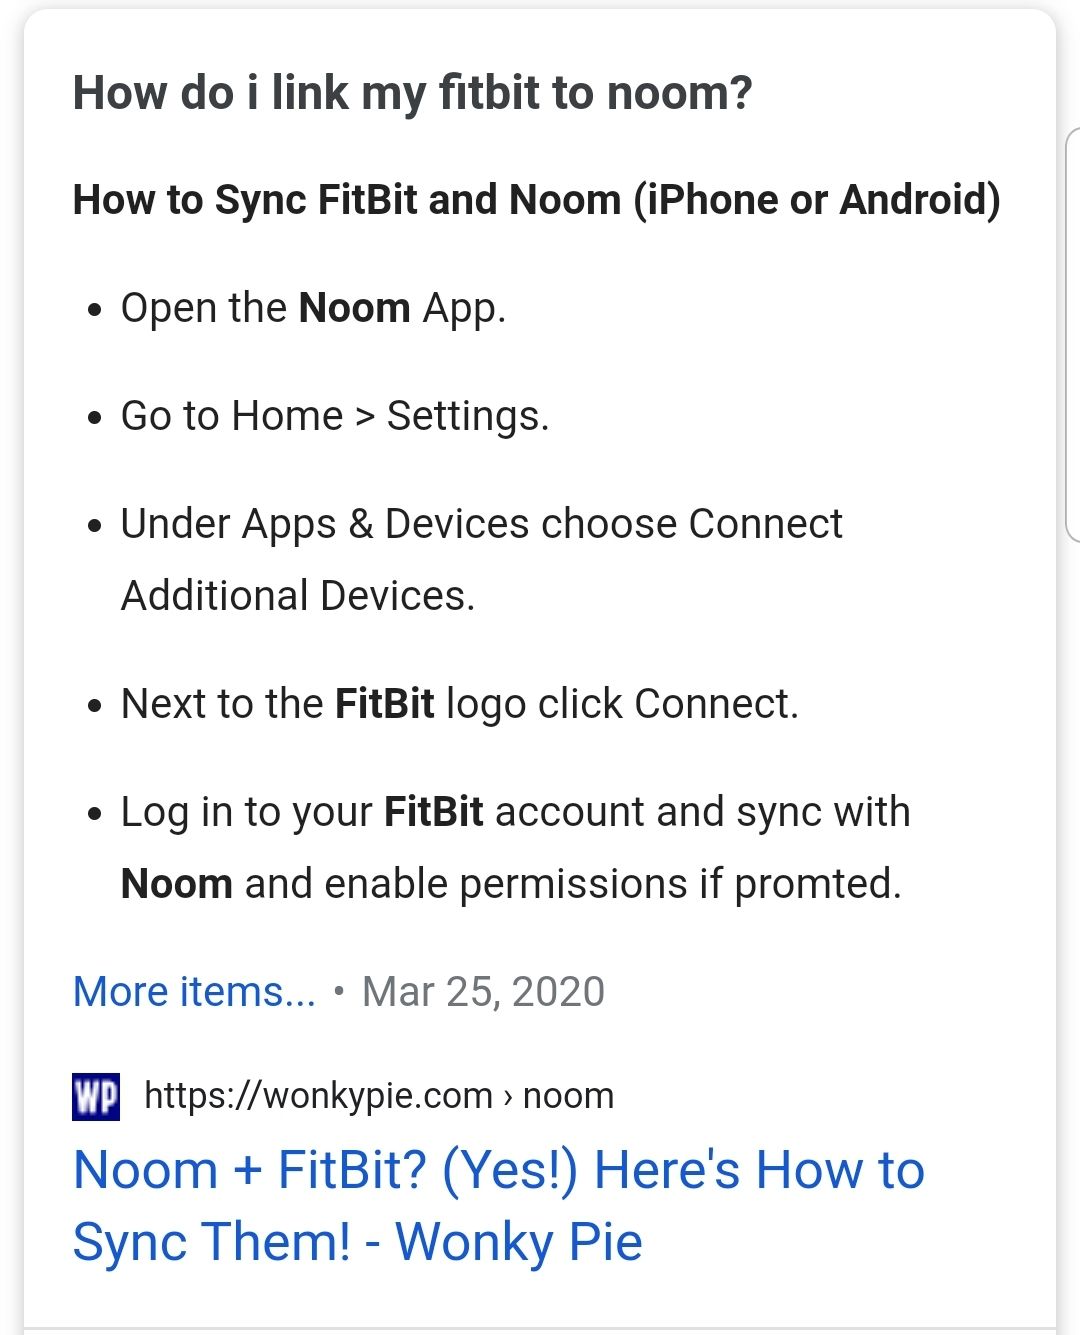 how do i link my fitbit to noom